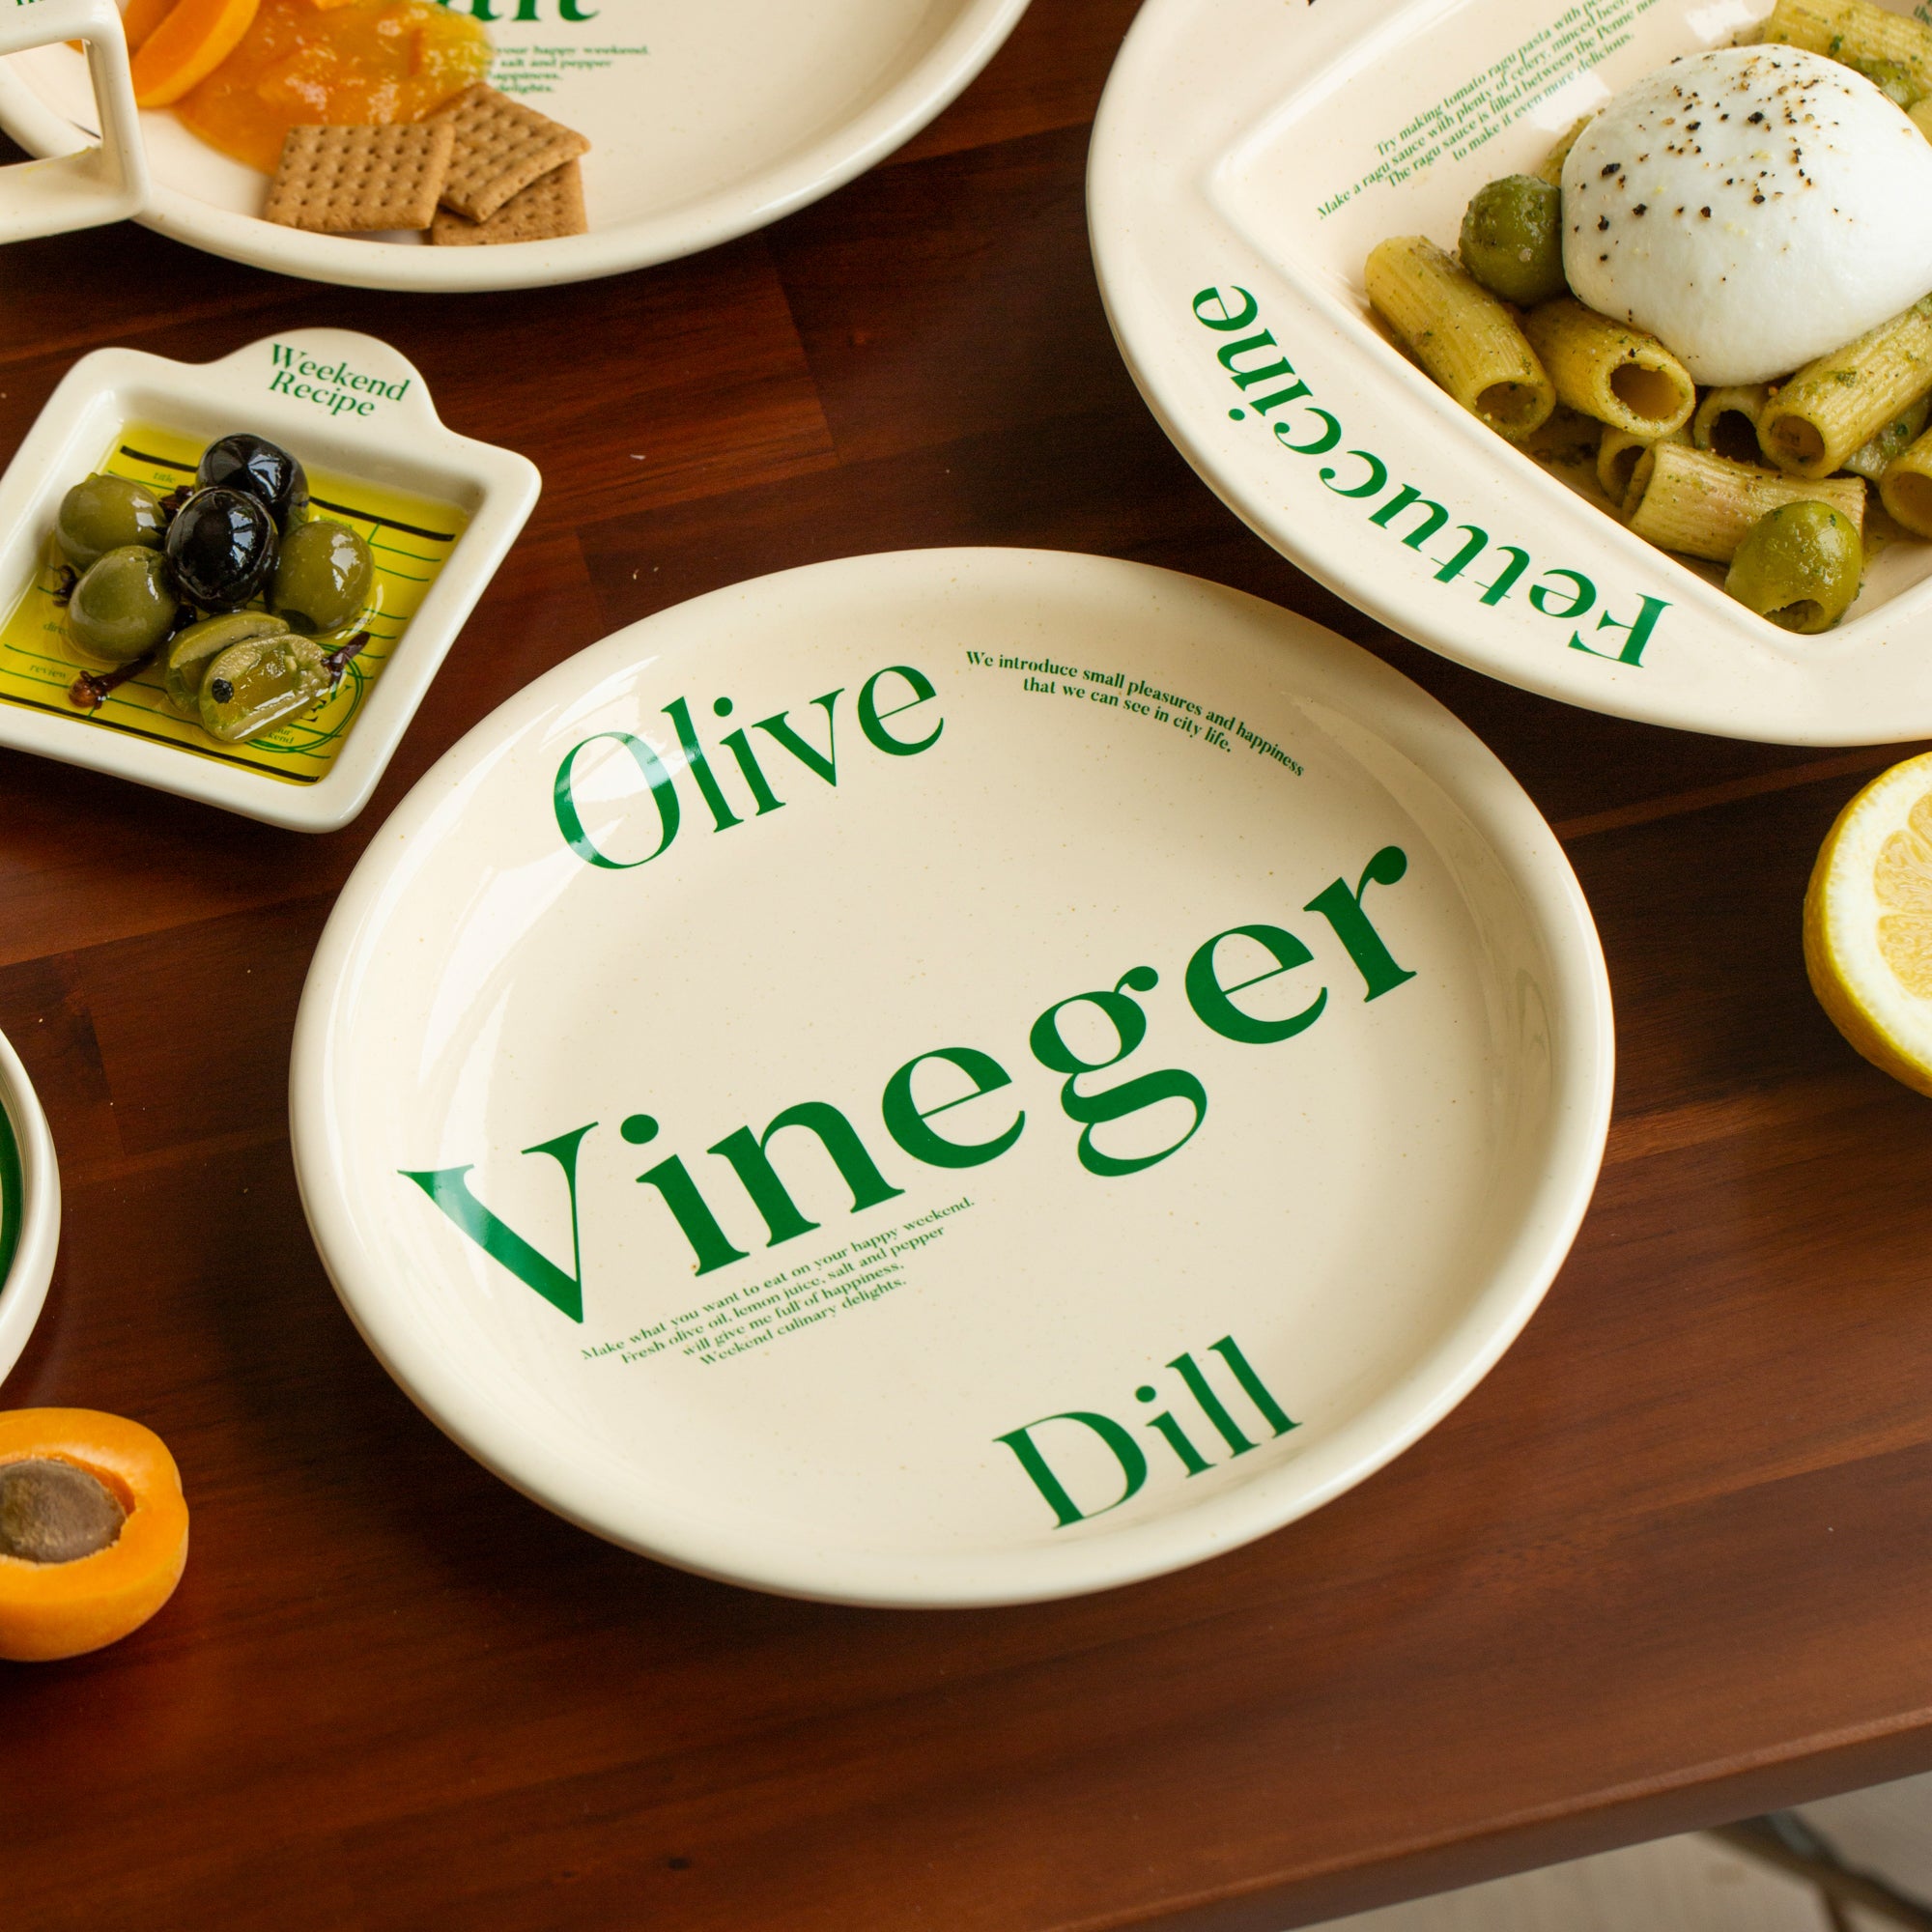 [weekend 6] City Life Bowl "Vineger"